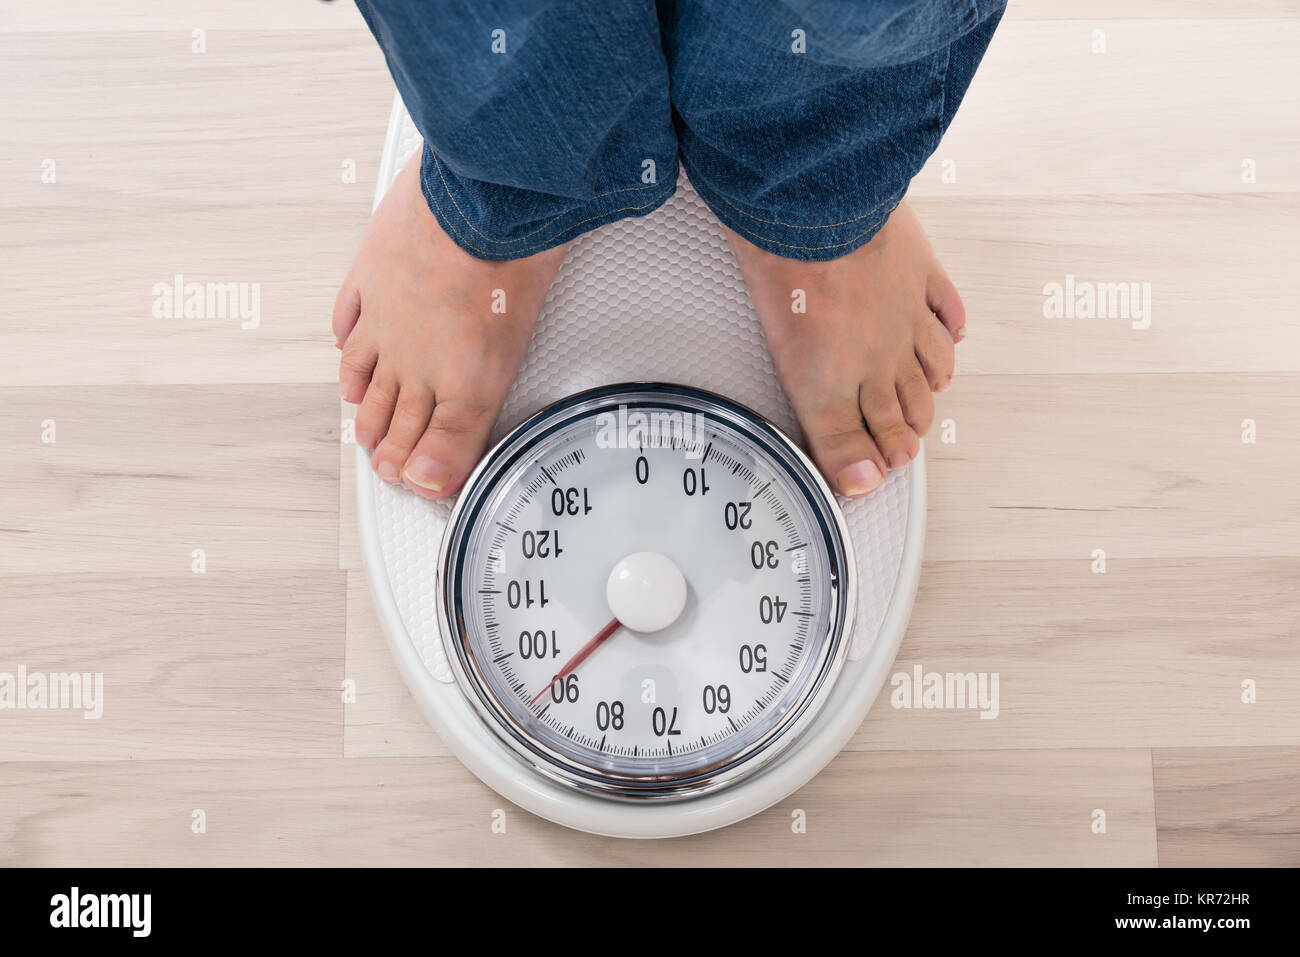 https://c8.alamy.com/comp/KR72HR/person-standing-on-weighing-scale-KR72HR.jpg